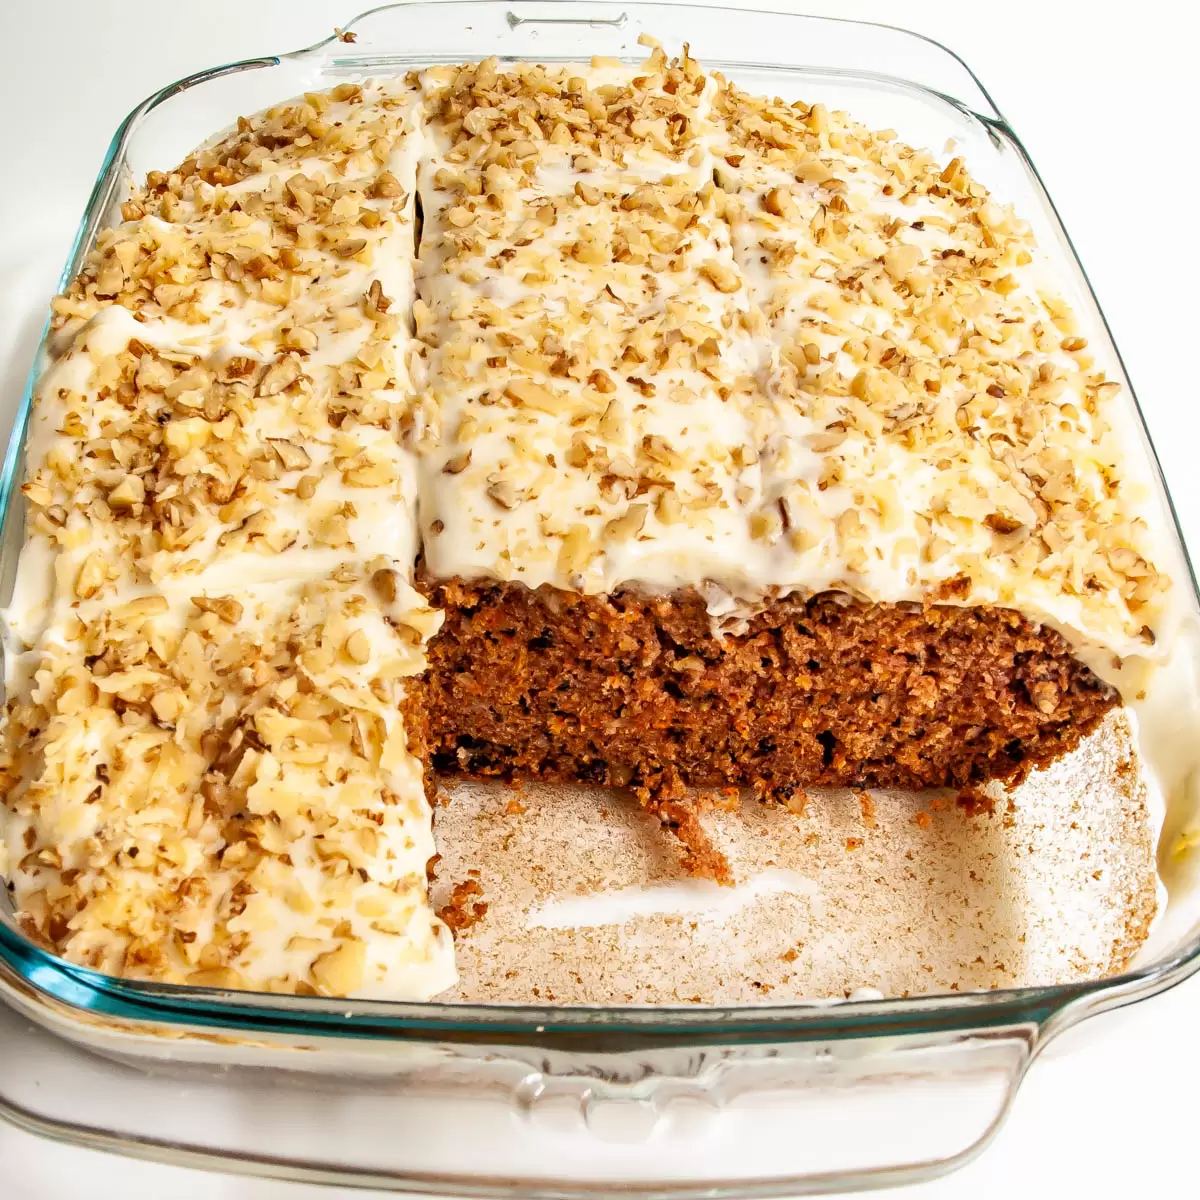 carrot cake in a baking dish topped with cream cheese icing and walnuts